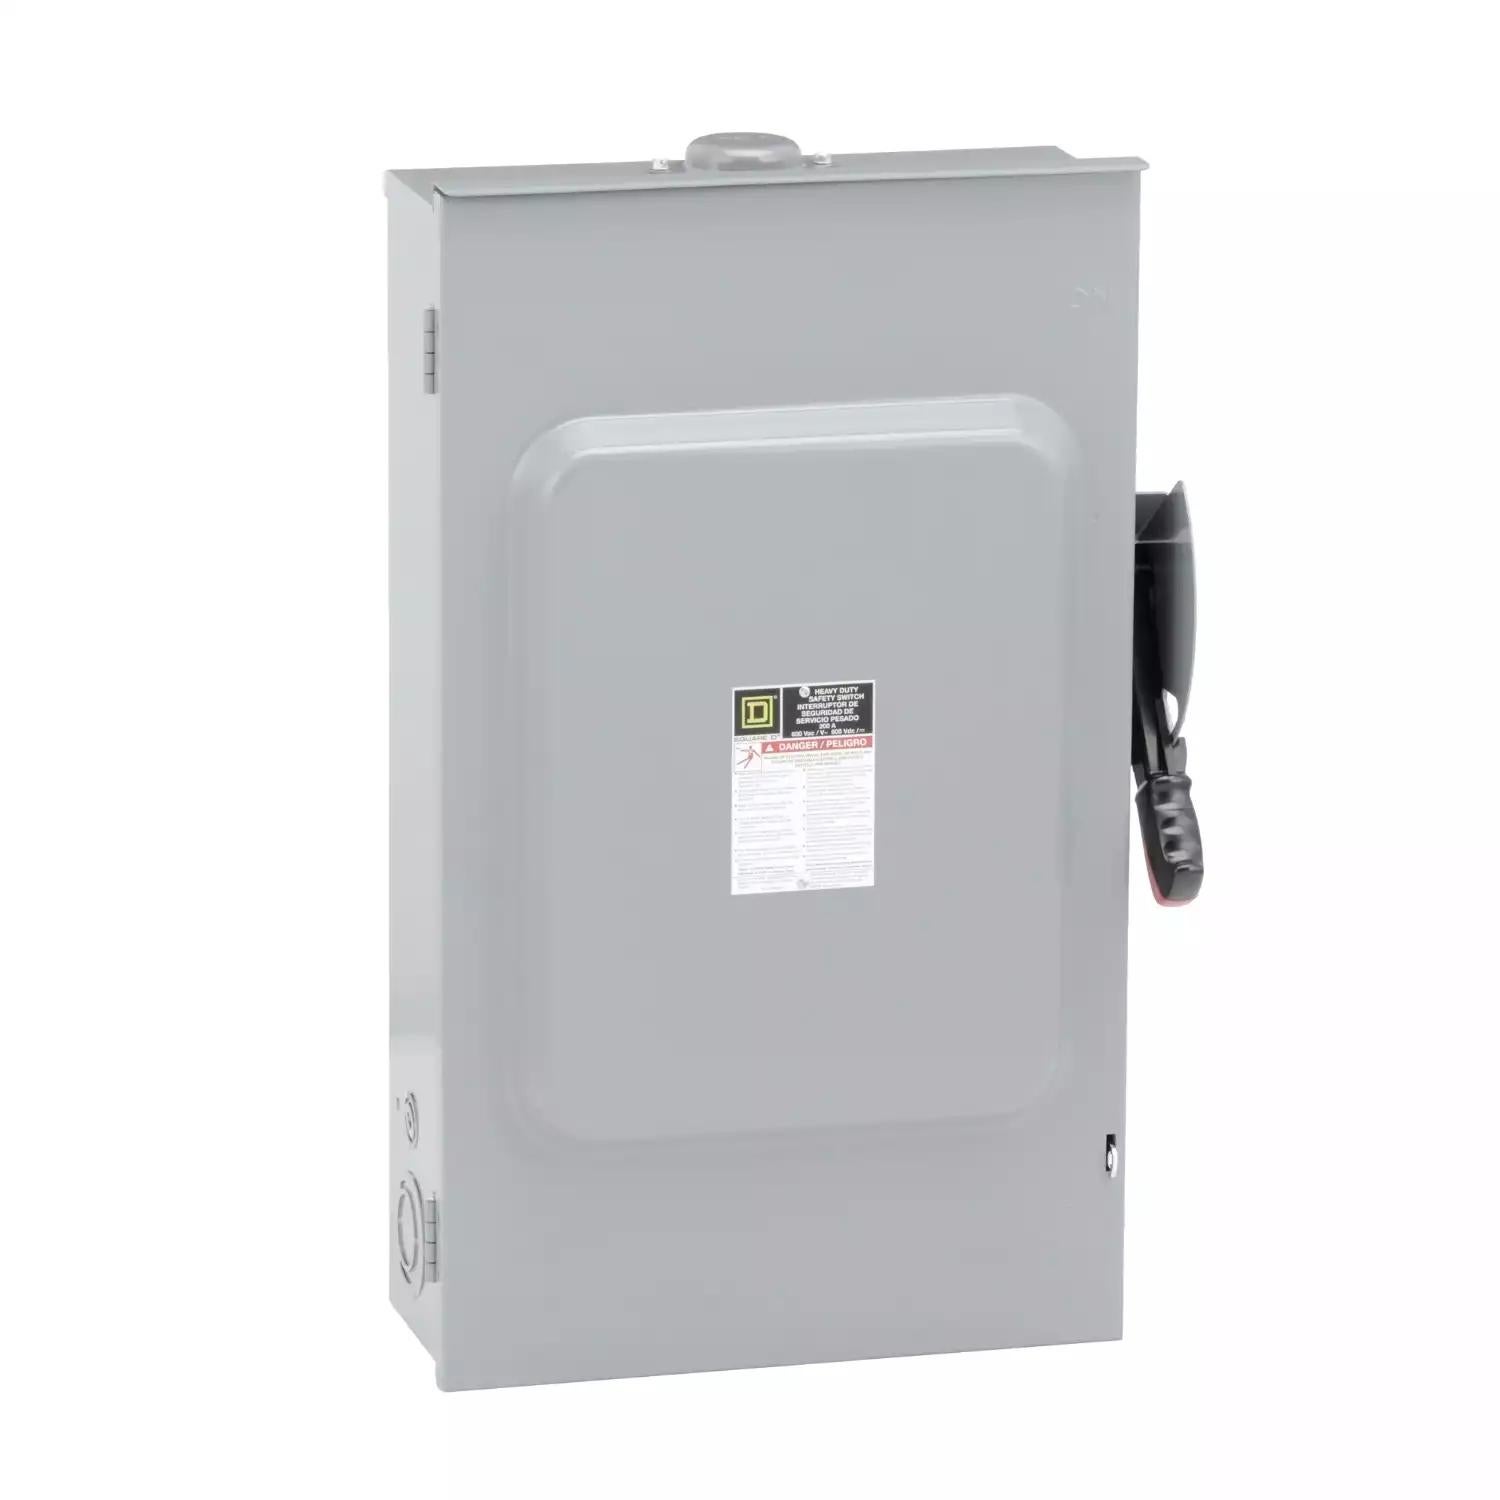 Safety switch, heavy duty, non fusible, 200A, 3 wire, 3 poles, 150hp, 600VAC/DC, Type 3R, bolt on hub provision